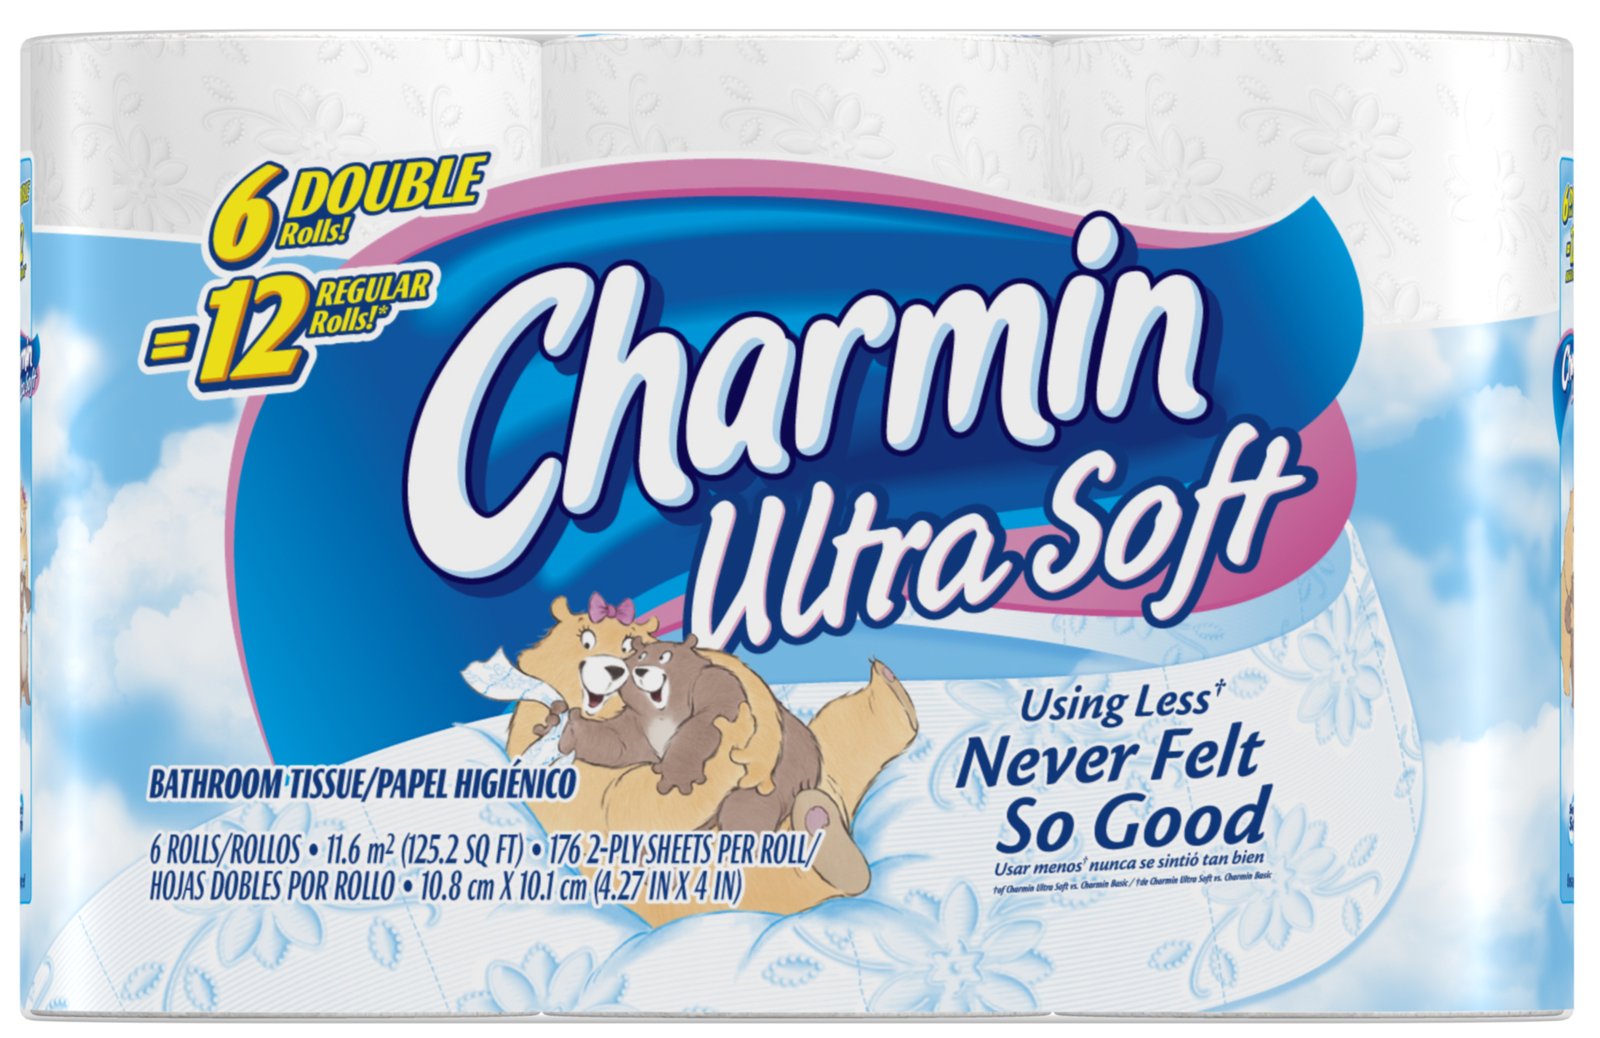 COUPONS: Mars Candy, Kellogg’s, Excedrin, Charmin, Softsoap, and MORE!